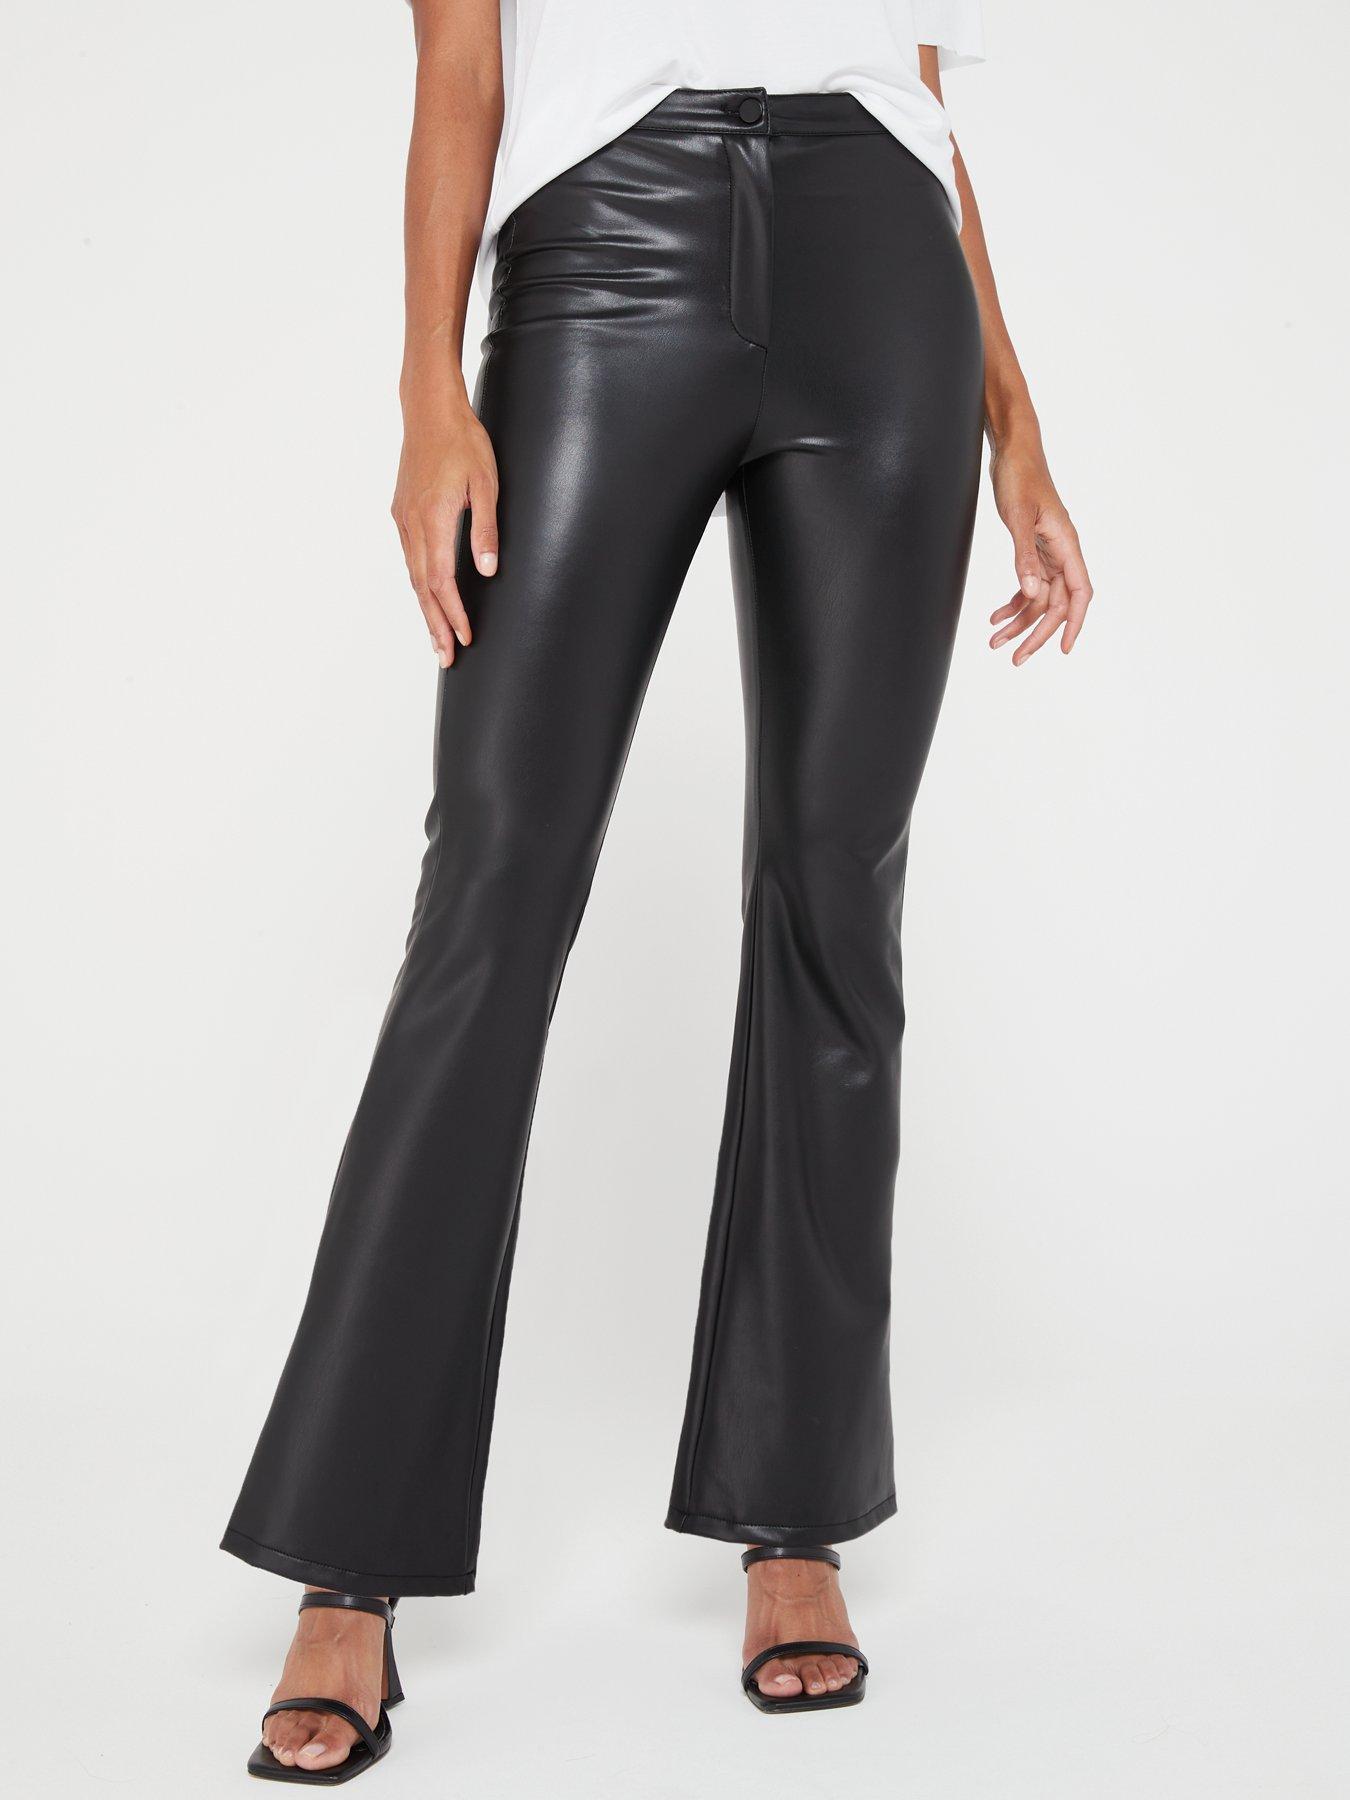 Espresso Women's Bell Bottom High Waisted Faux Leather Pants Flare